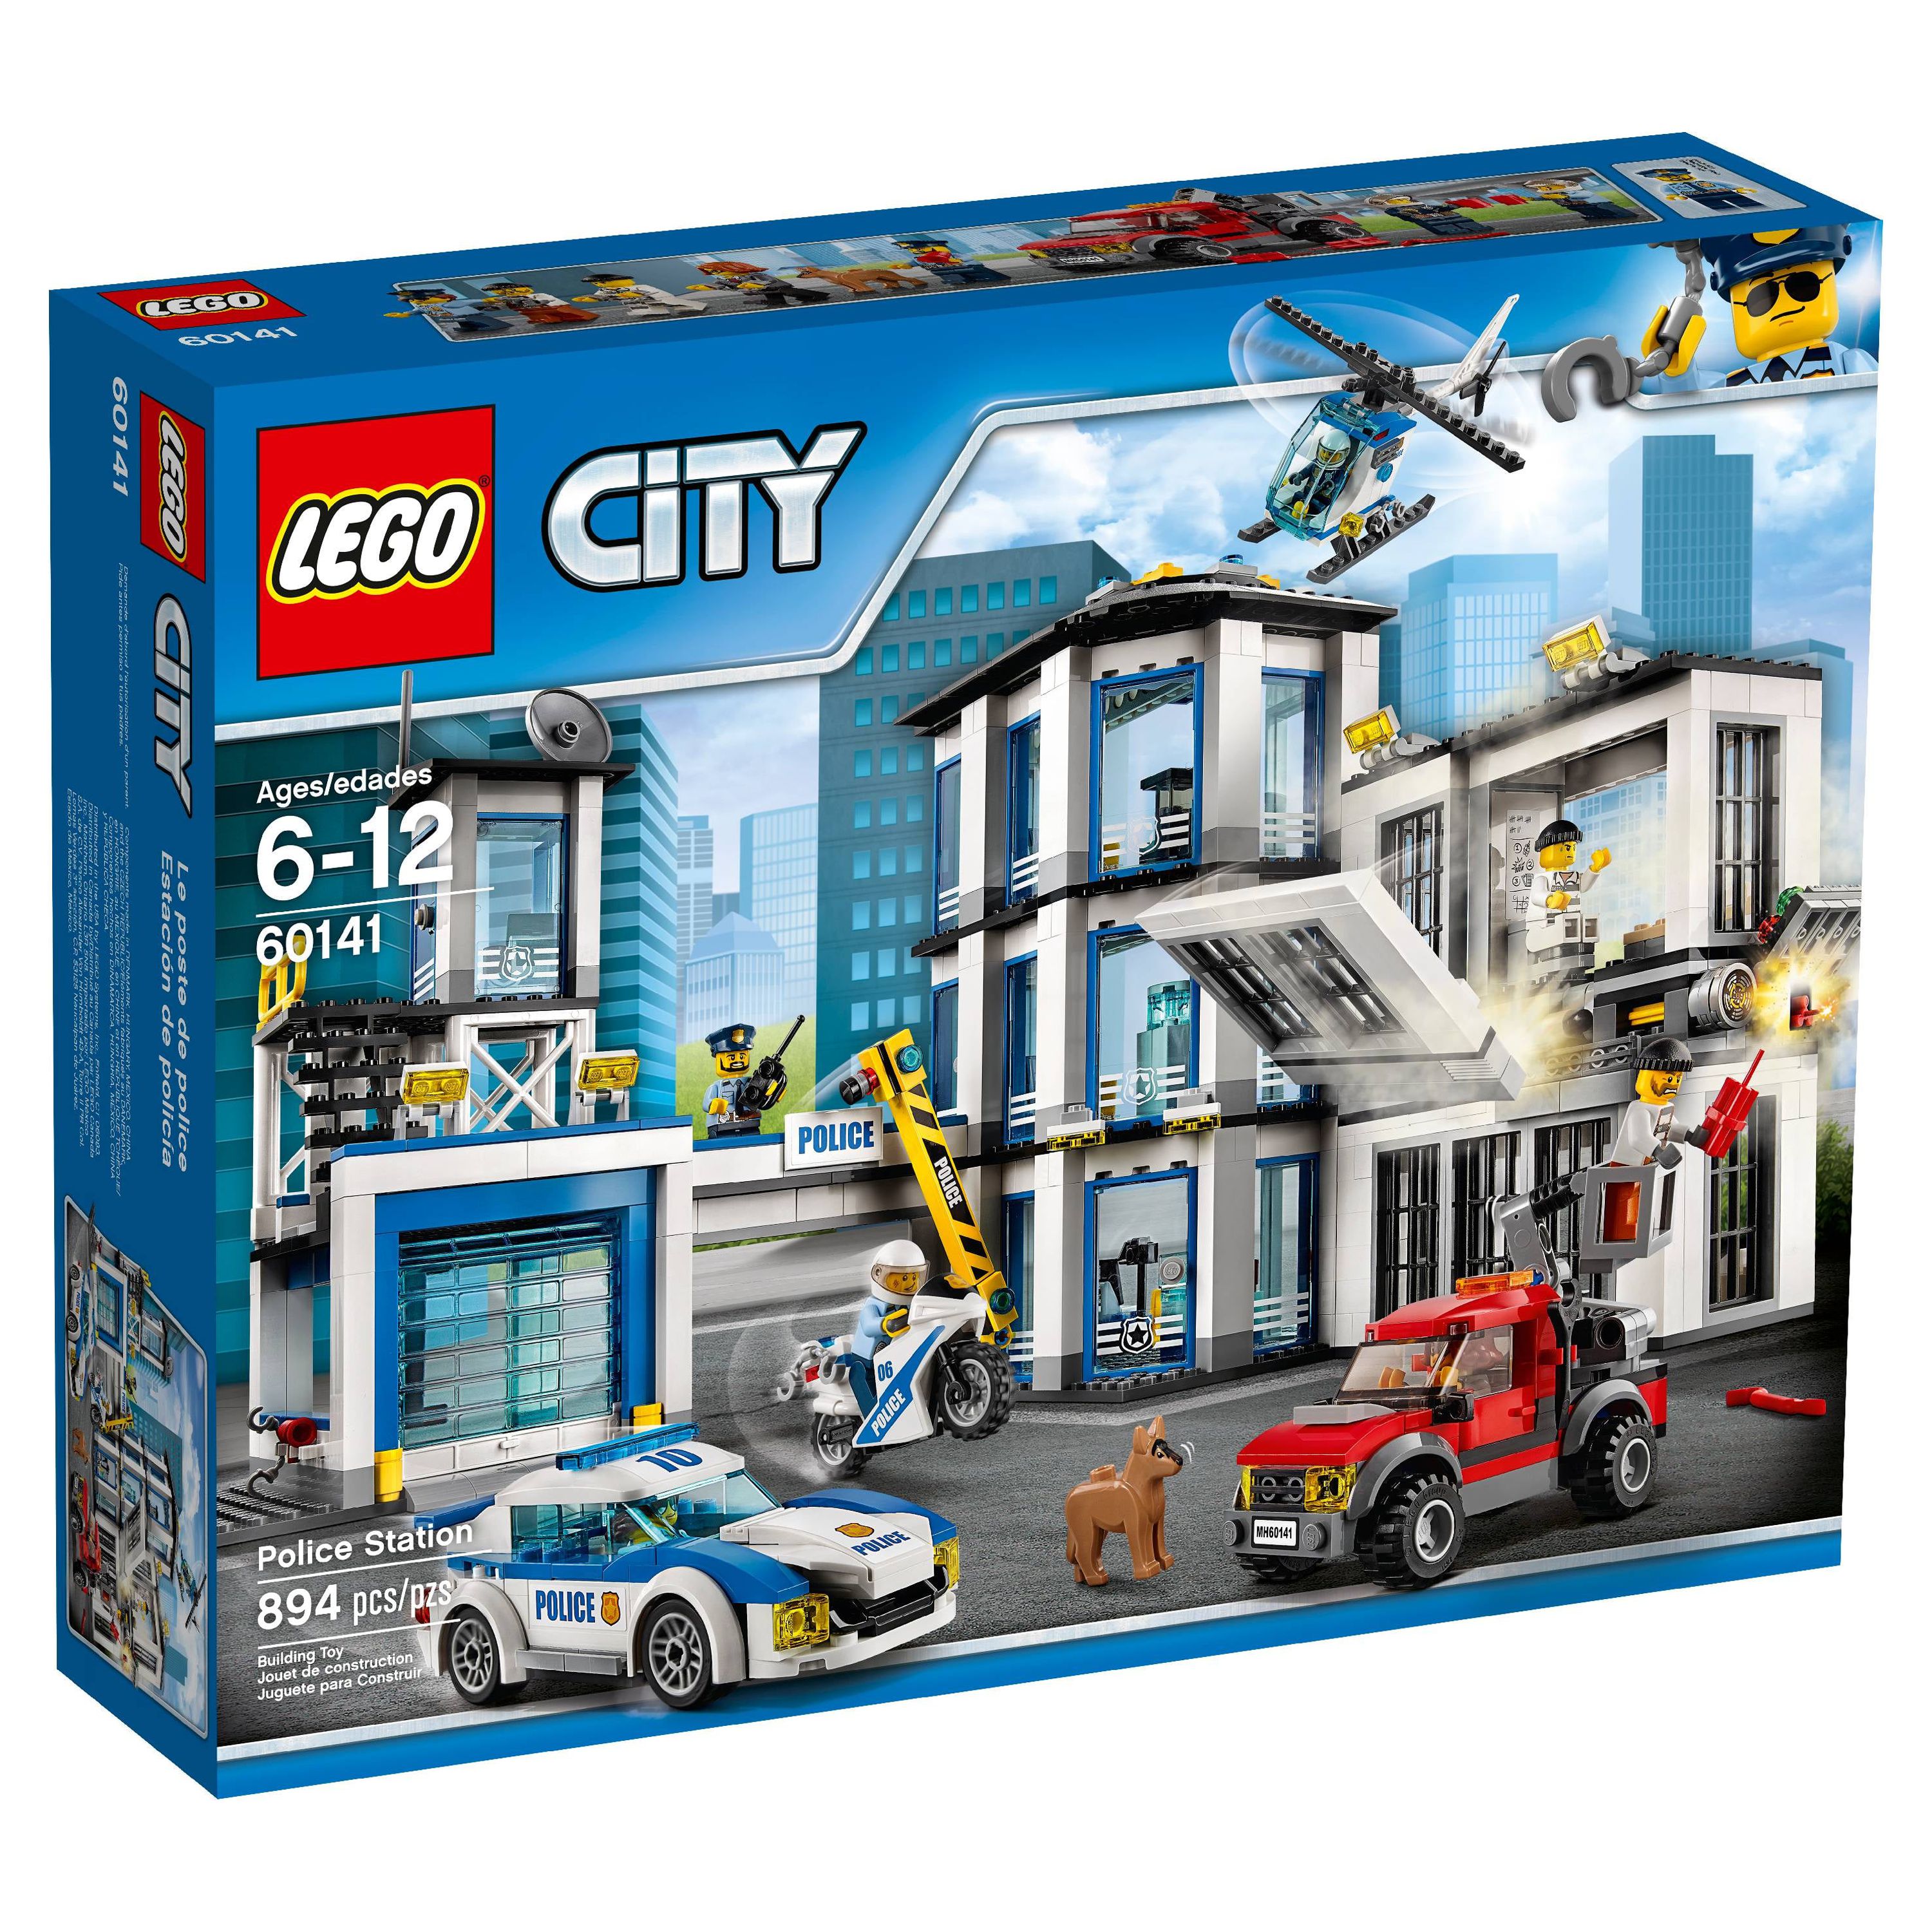 LEGO City Police Station 60141 Building Set (894 Pieces) - image 4 of 7